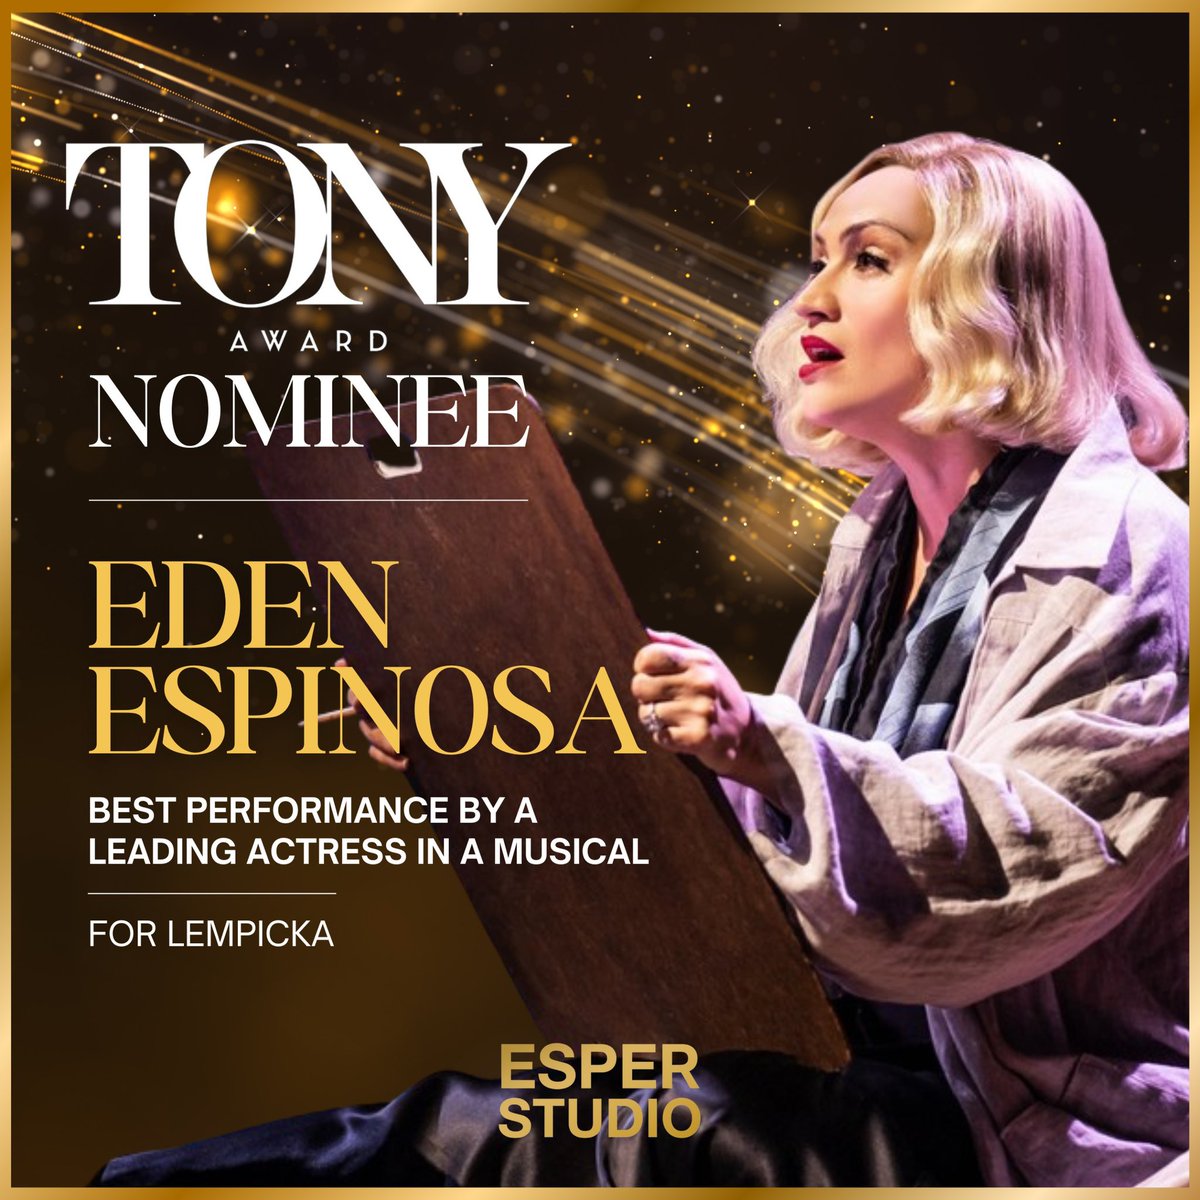 We are thrilled for Eden Espinosa and her Tony Award nomination for her amazing performance in the hit musical ‘Lempicka’! Bravo, Eden!

📸 Lempicka

#edenespinosa #tonyawards #lempicka #esperstudio #esperalum #meisner #acting #actingschool #actingstudio #actingstudionyc